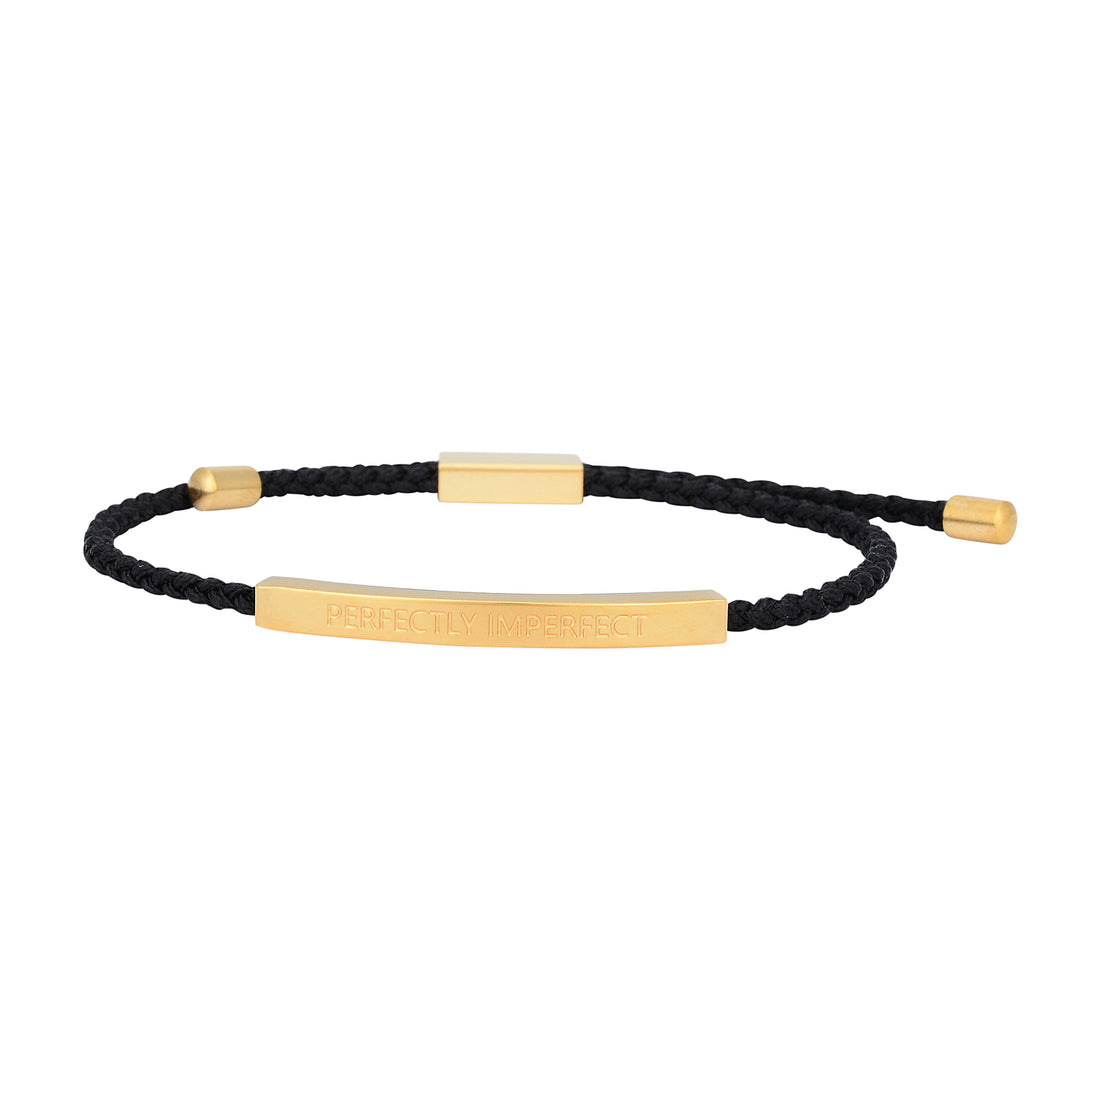 PERFECTLY IMPERFECT GOLD BRACELET